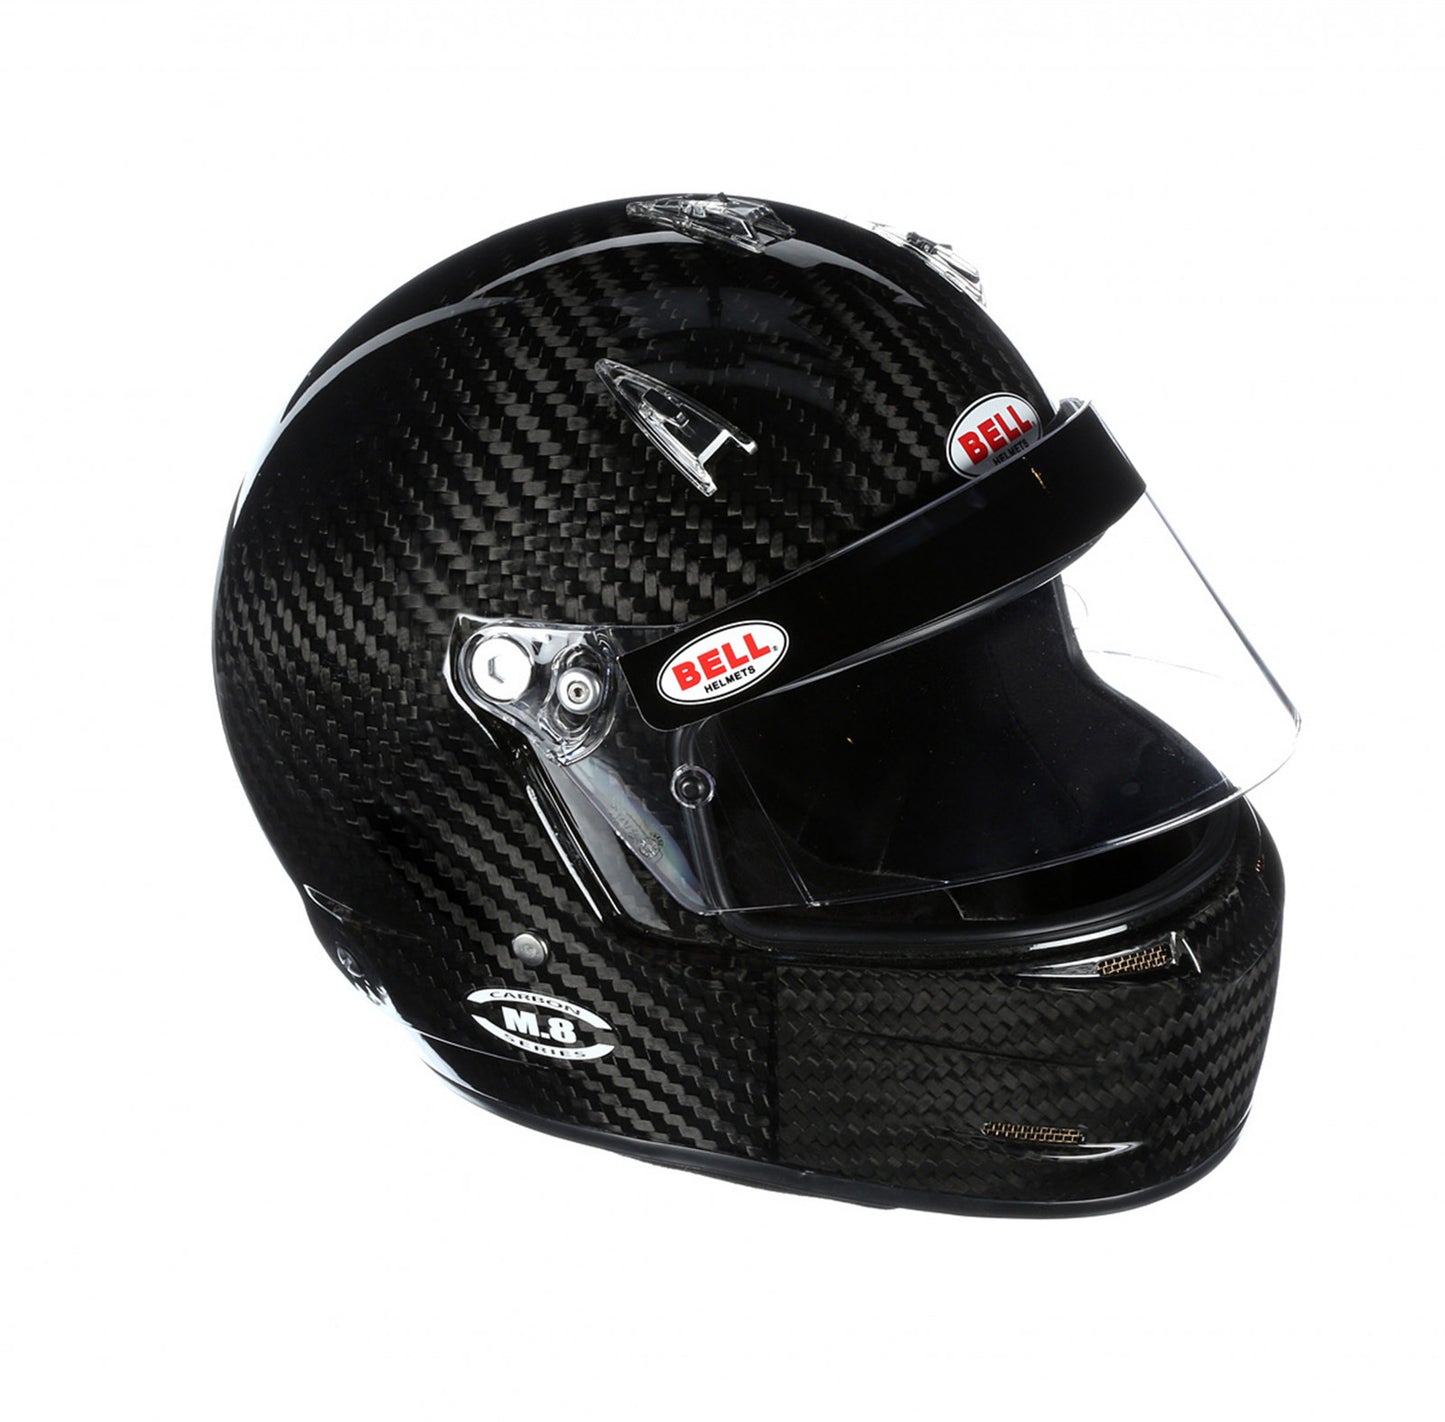 Bell M8 Carbon Racing Helmet Size Small '1208002